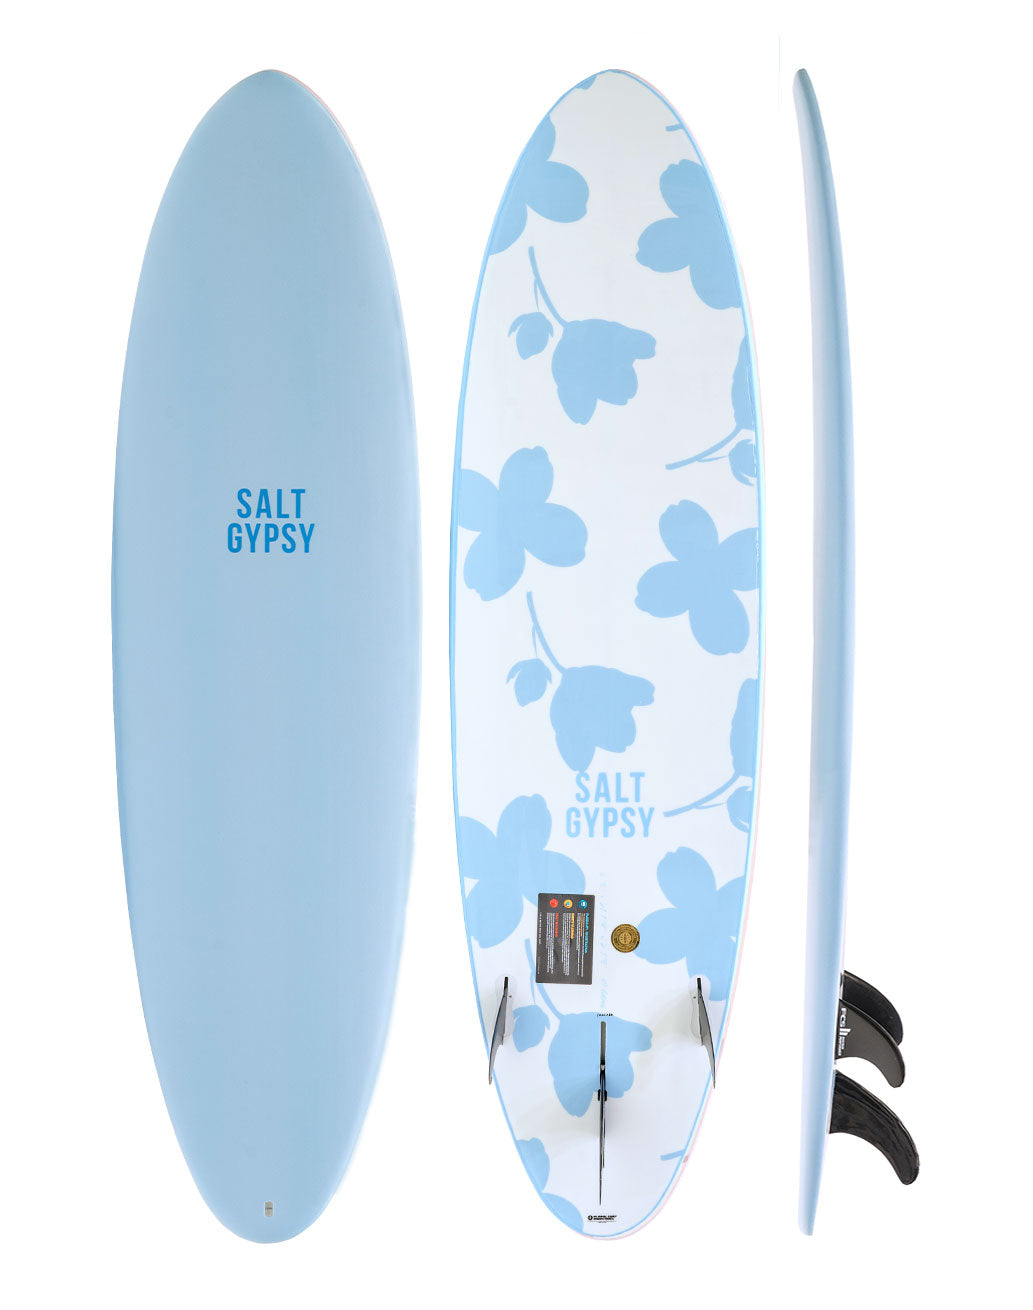 Salt Gypsy Surfboards Mid Tide - blue and white floral mid length soft surfboard